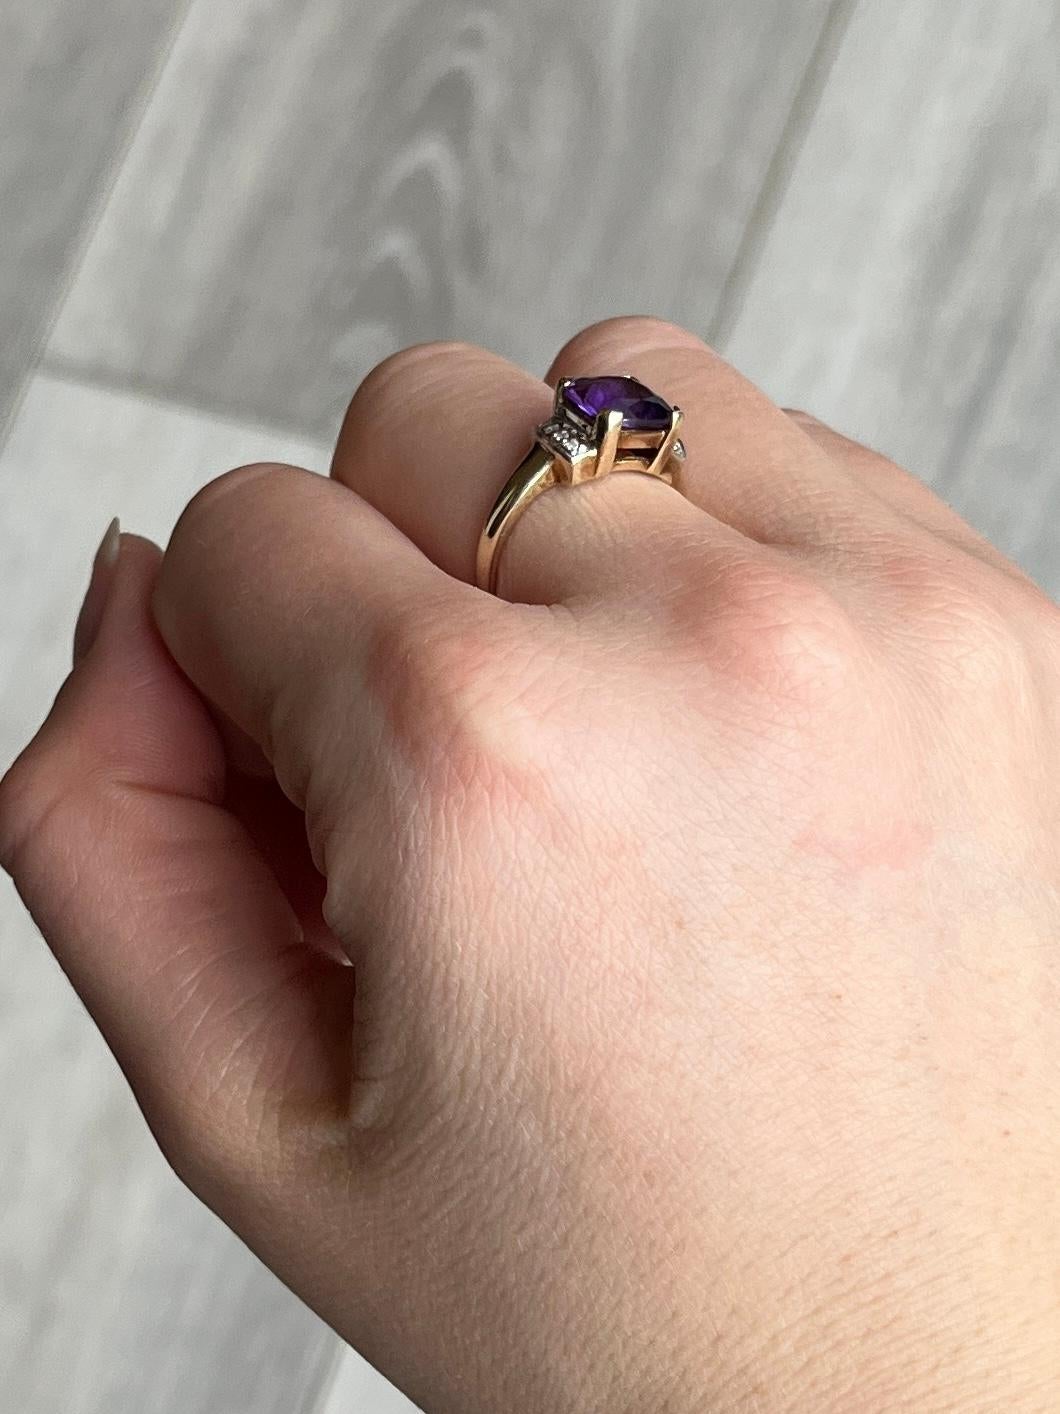 The amethyst stone in this ring is bright and a gorgeous colour. There are two rows of four diamonds that sit either side of the central stone. Diamond total 8pts. Modelled in 9carat gold. Amethyst dimensions 8x8mm.

Ring Size: L 1/2 or 6 
Height